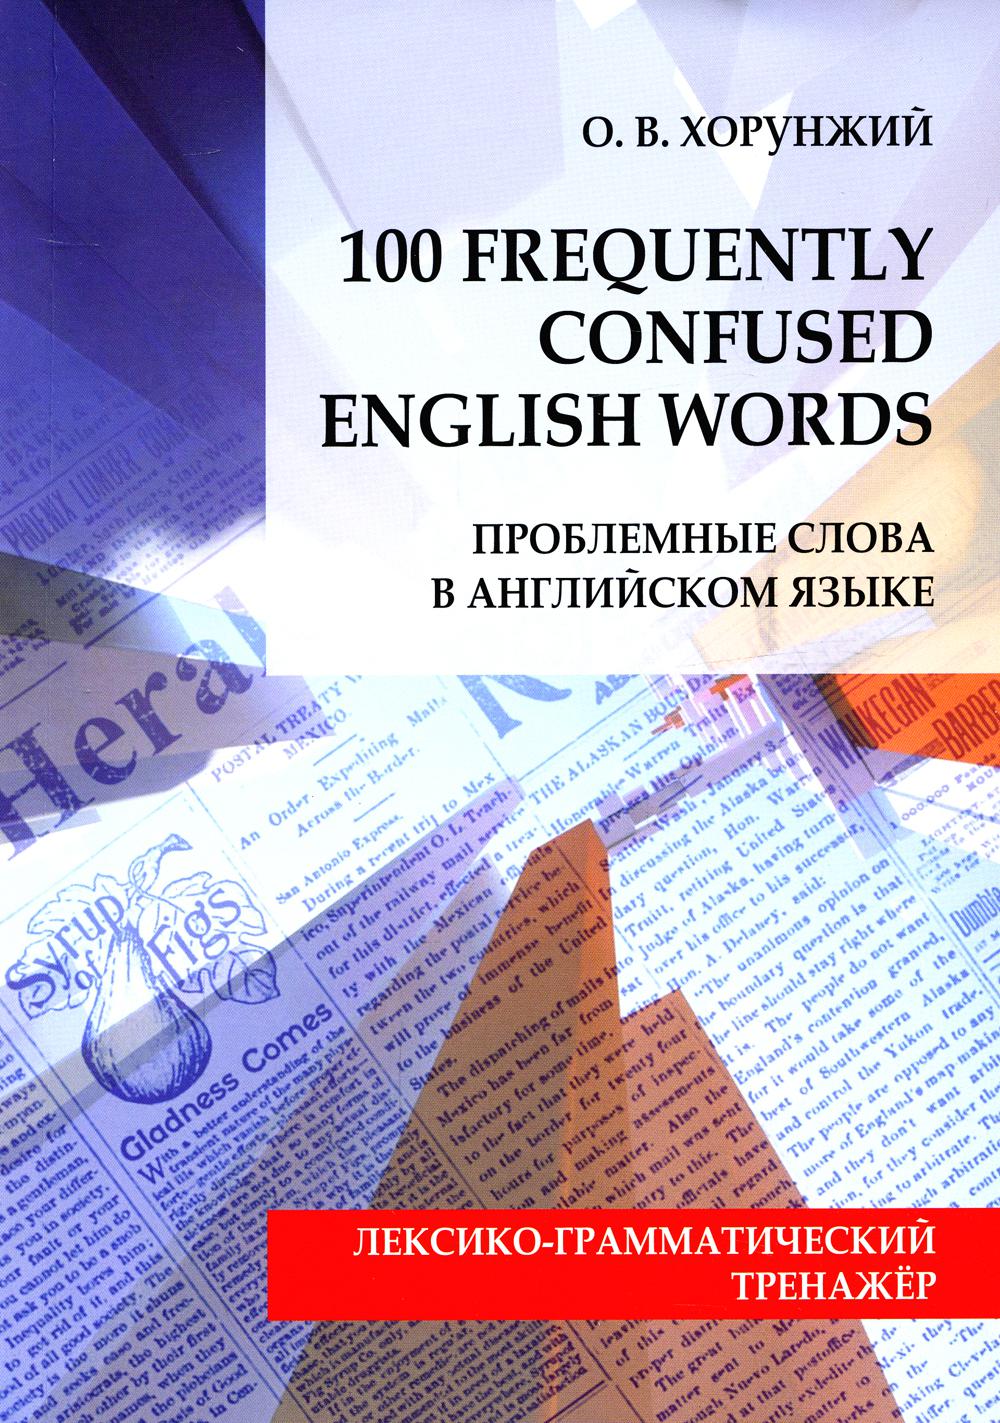      = 100 Freguently onfused English Words